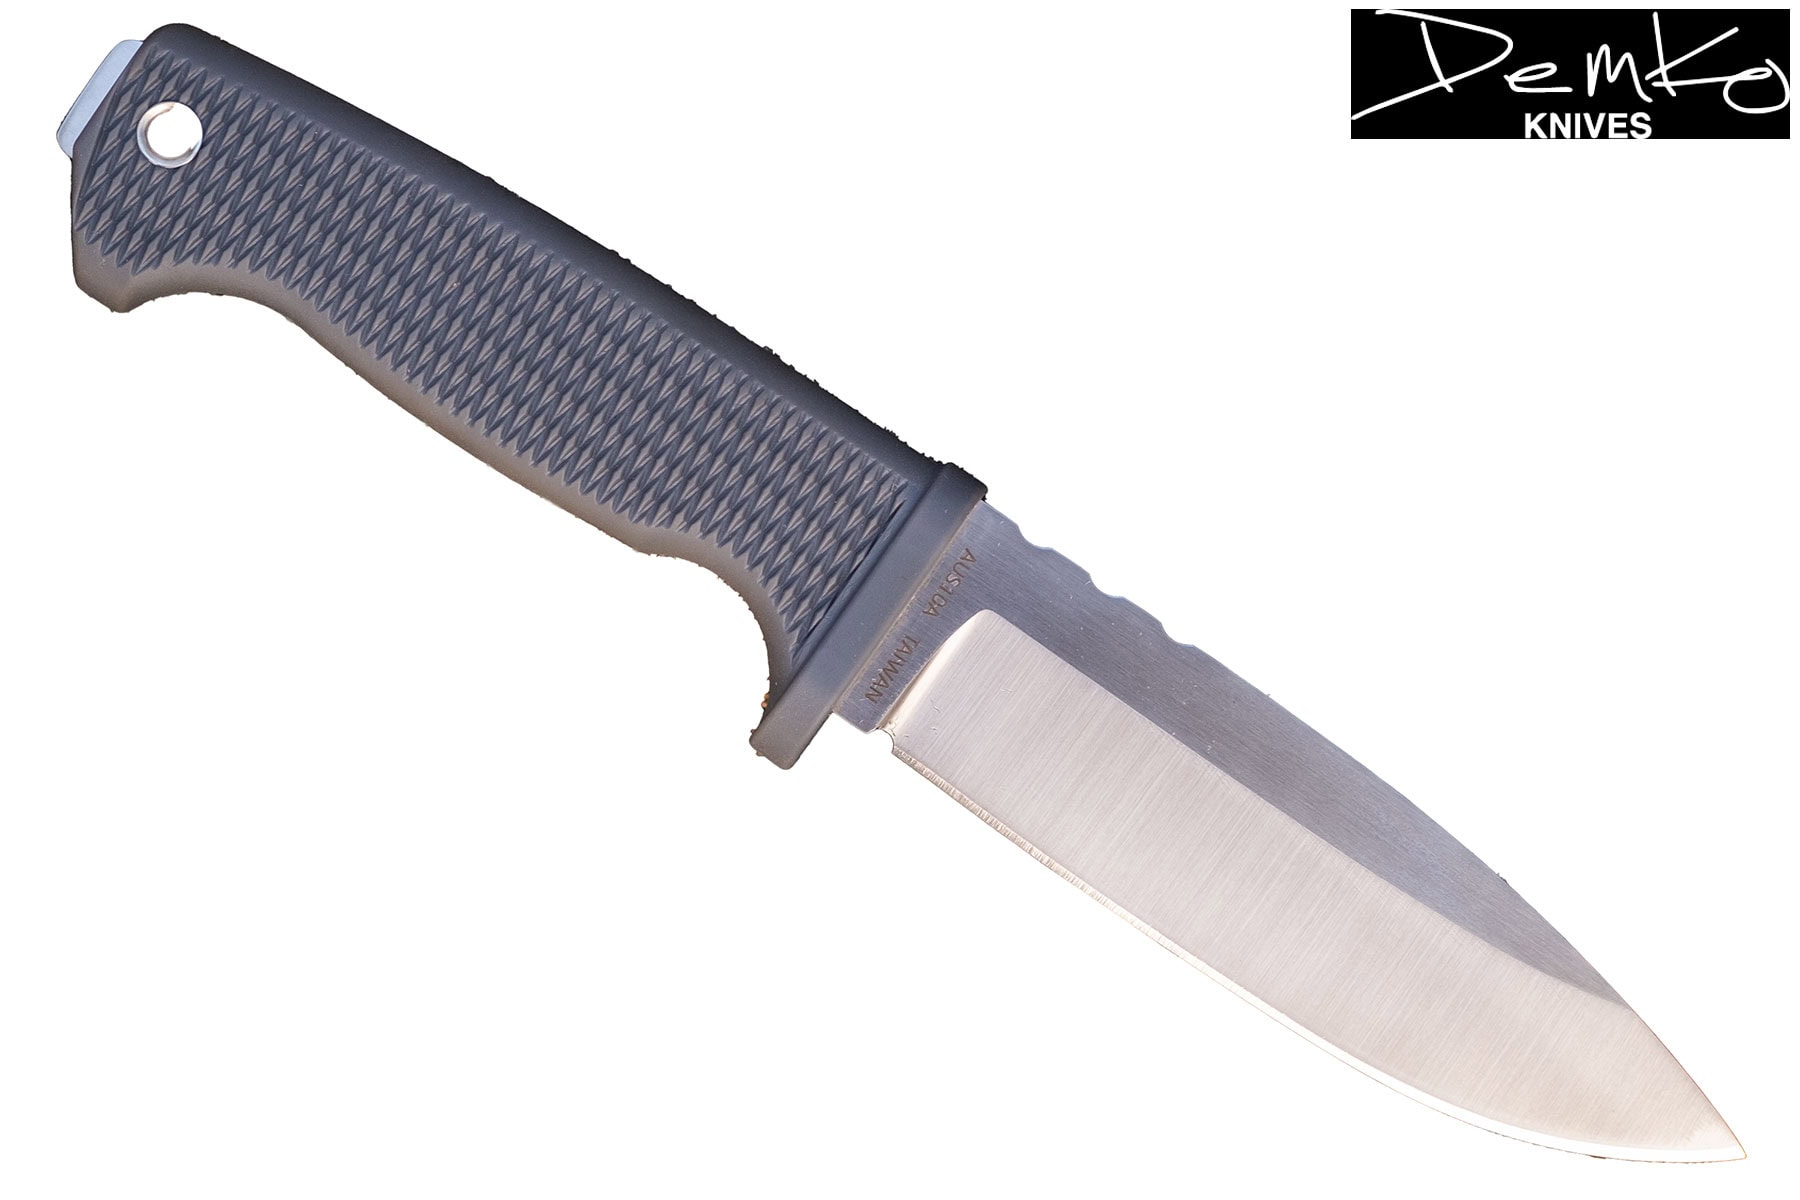 Most Demk knives are made in Taiwan, but the Freereign pictured here has limited US runs a few times a year.